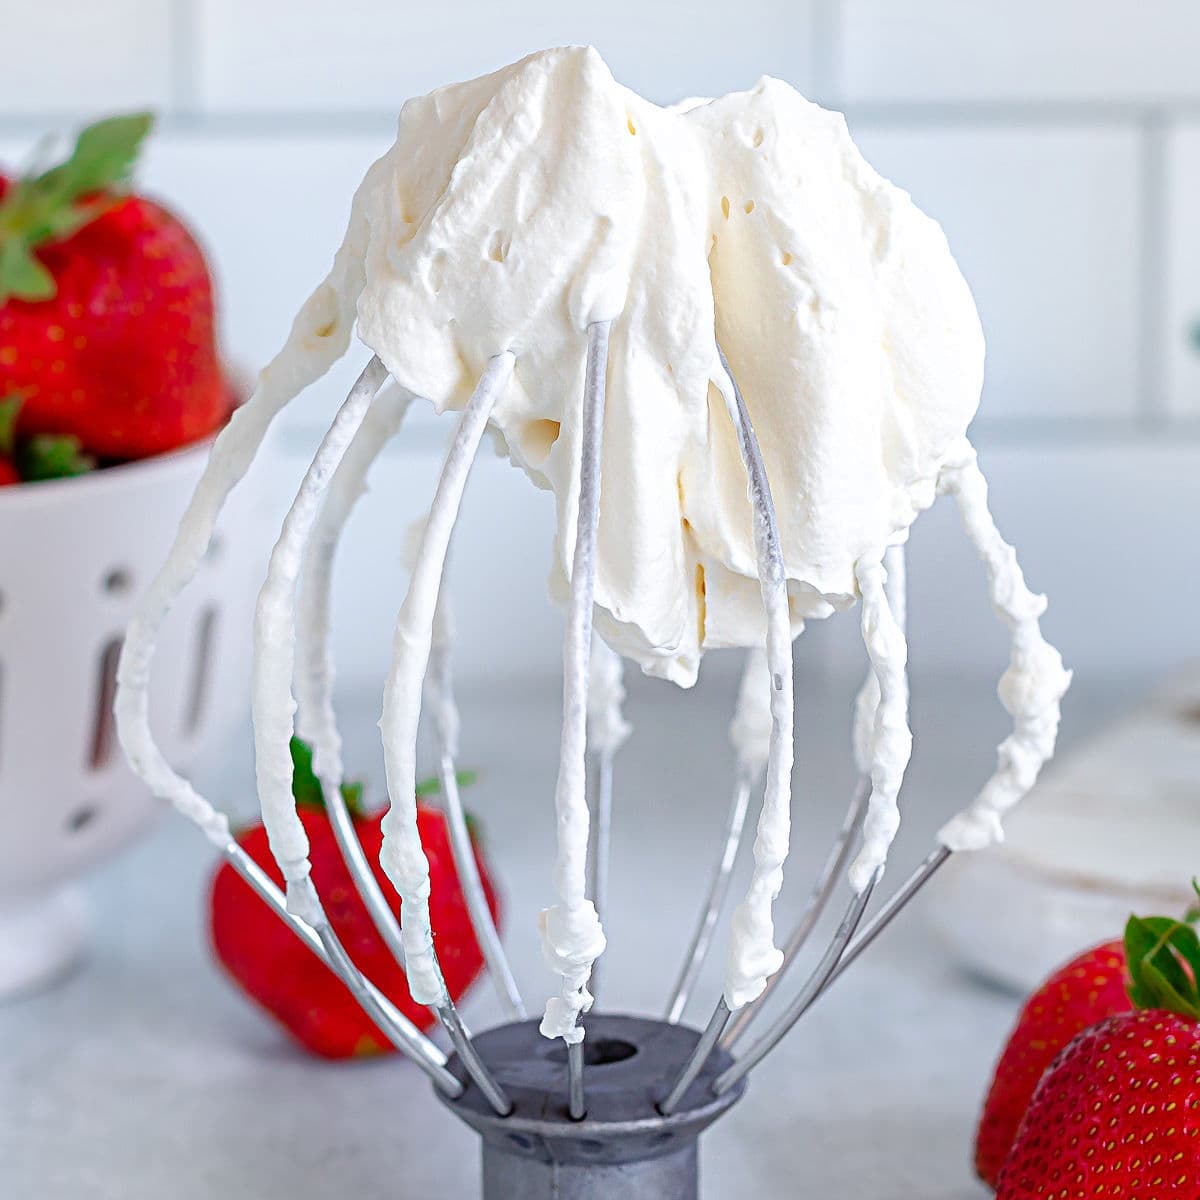 https://www.momontimeout.com/wp-content/uploads/2021/05/whipped-cream-on-whisk-square.jpeg